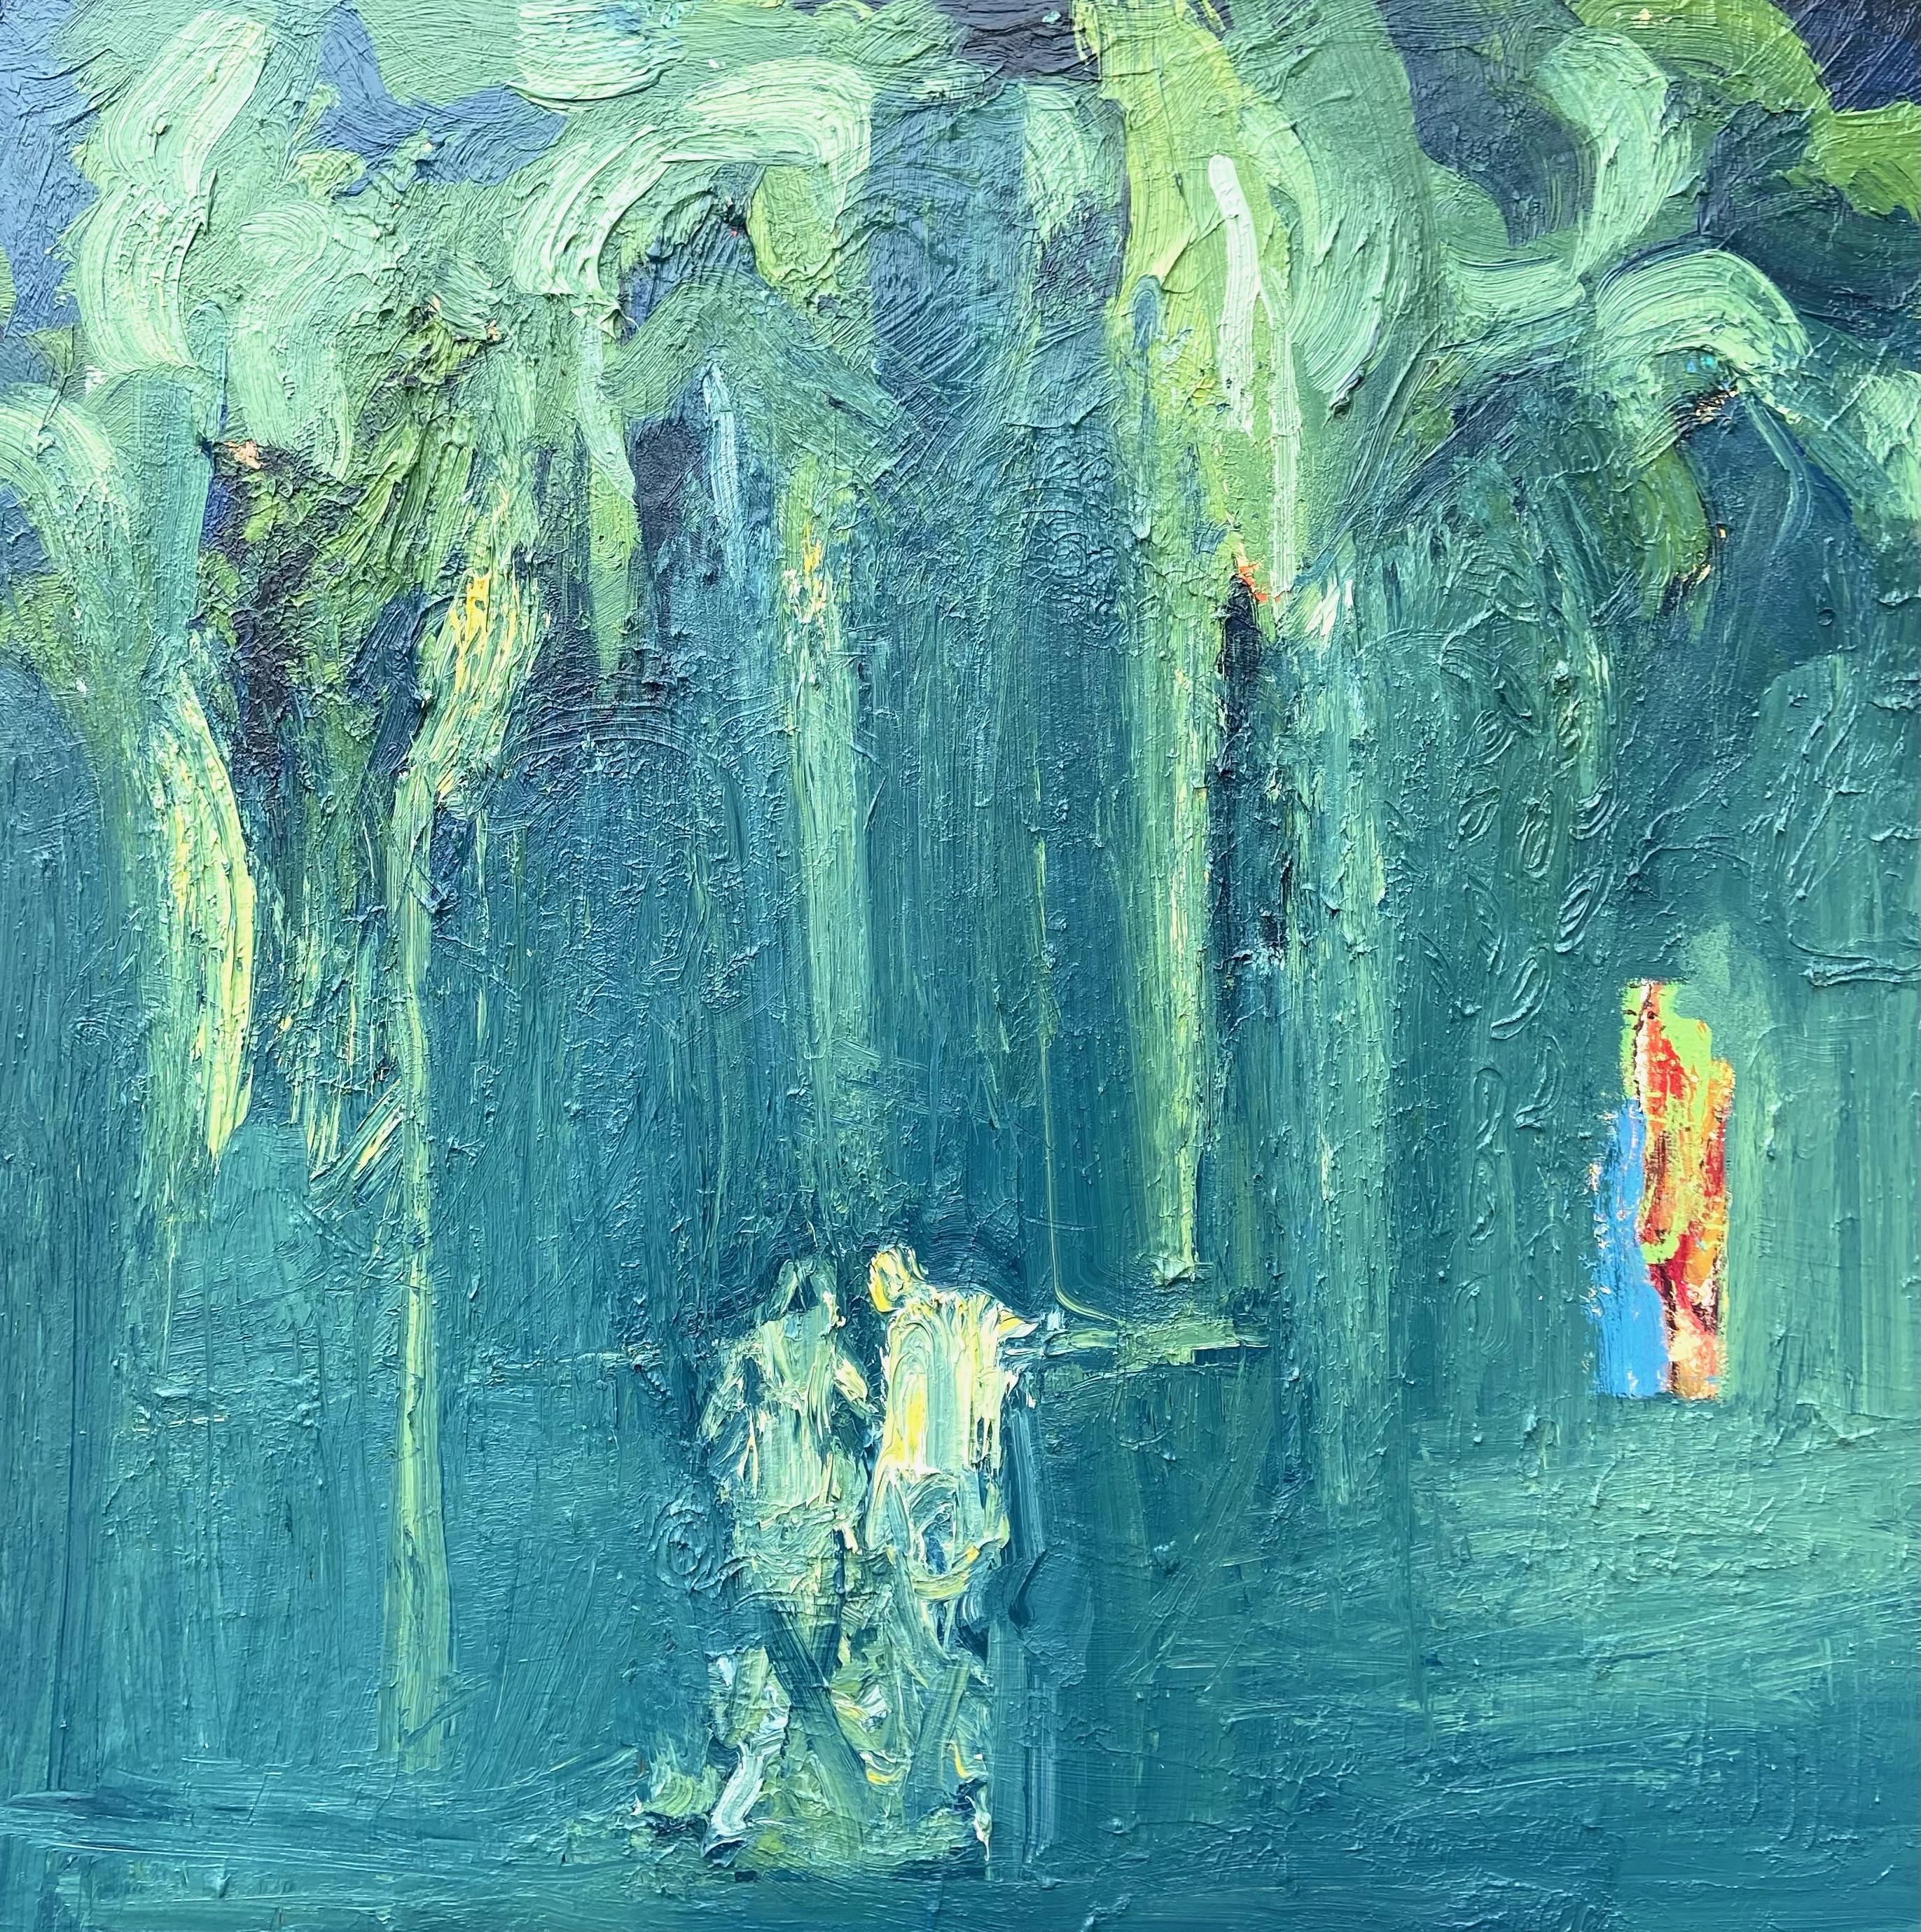 Paul wadsworth Abstract Painting – Swimming With Nature: Großes Ölgemälde des abstrakten Expressionismus